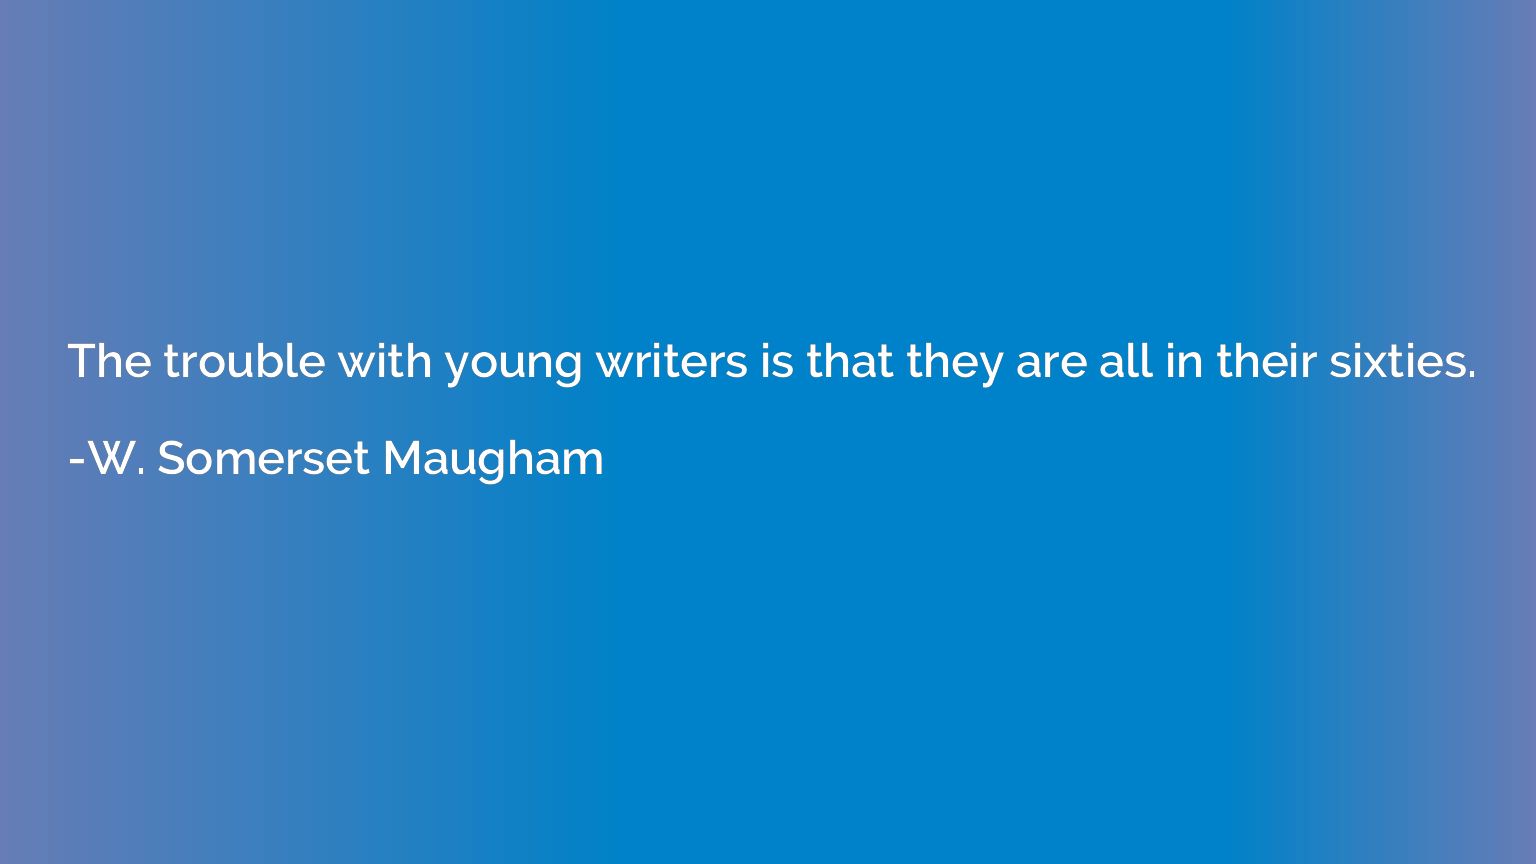 The trouble with young writers is that they are all in their